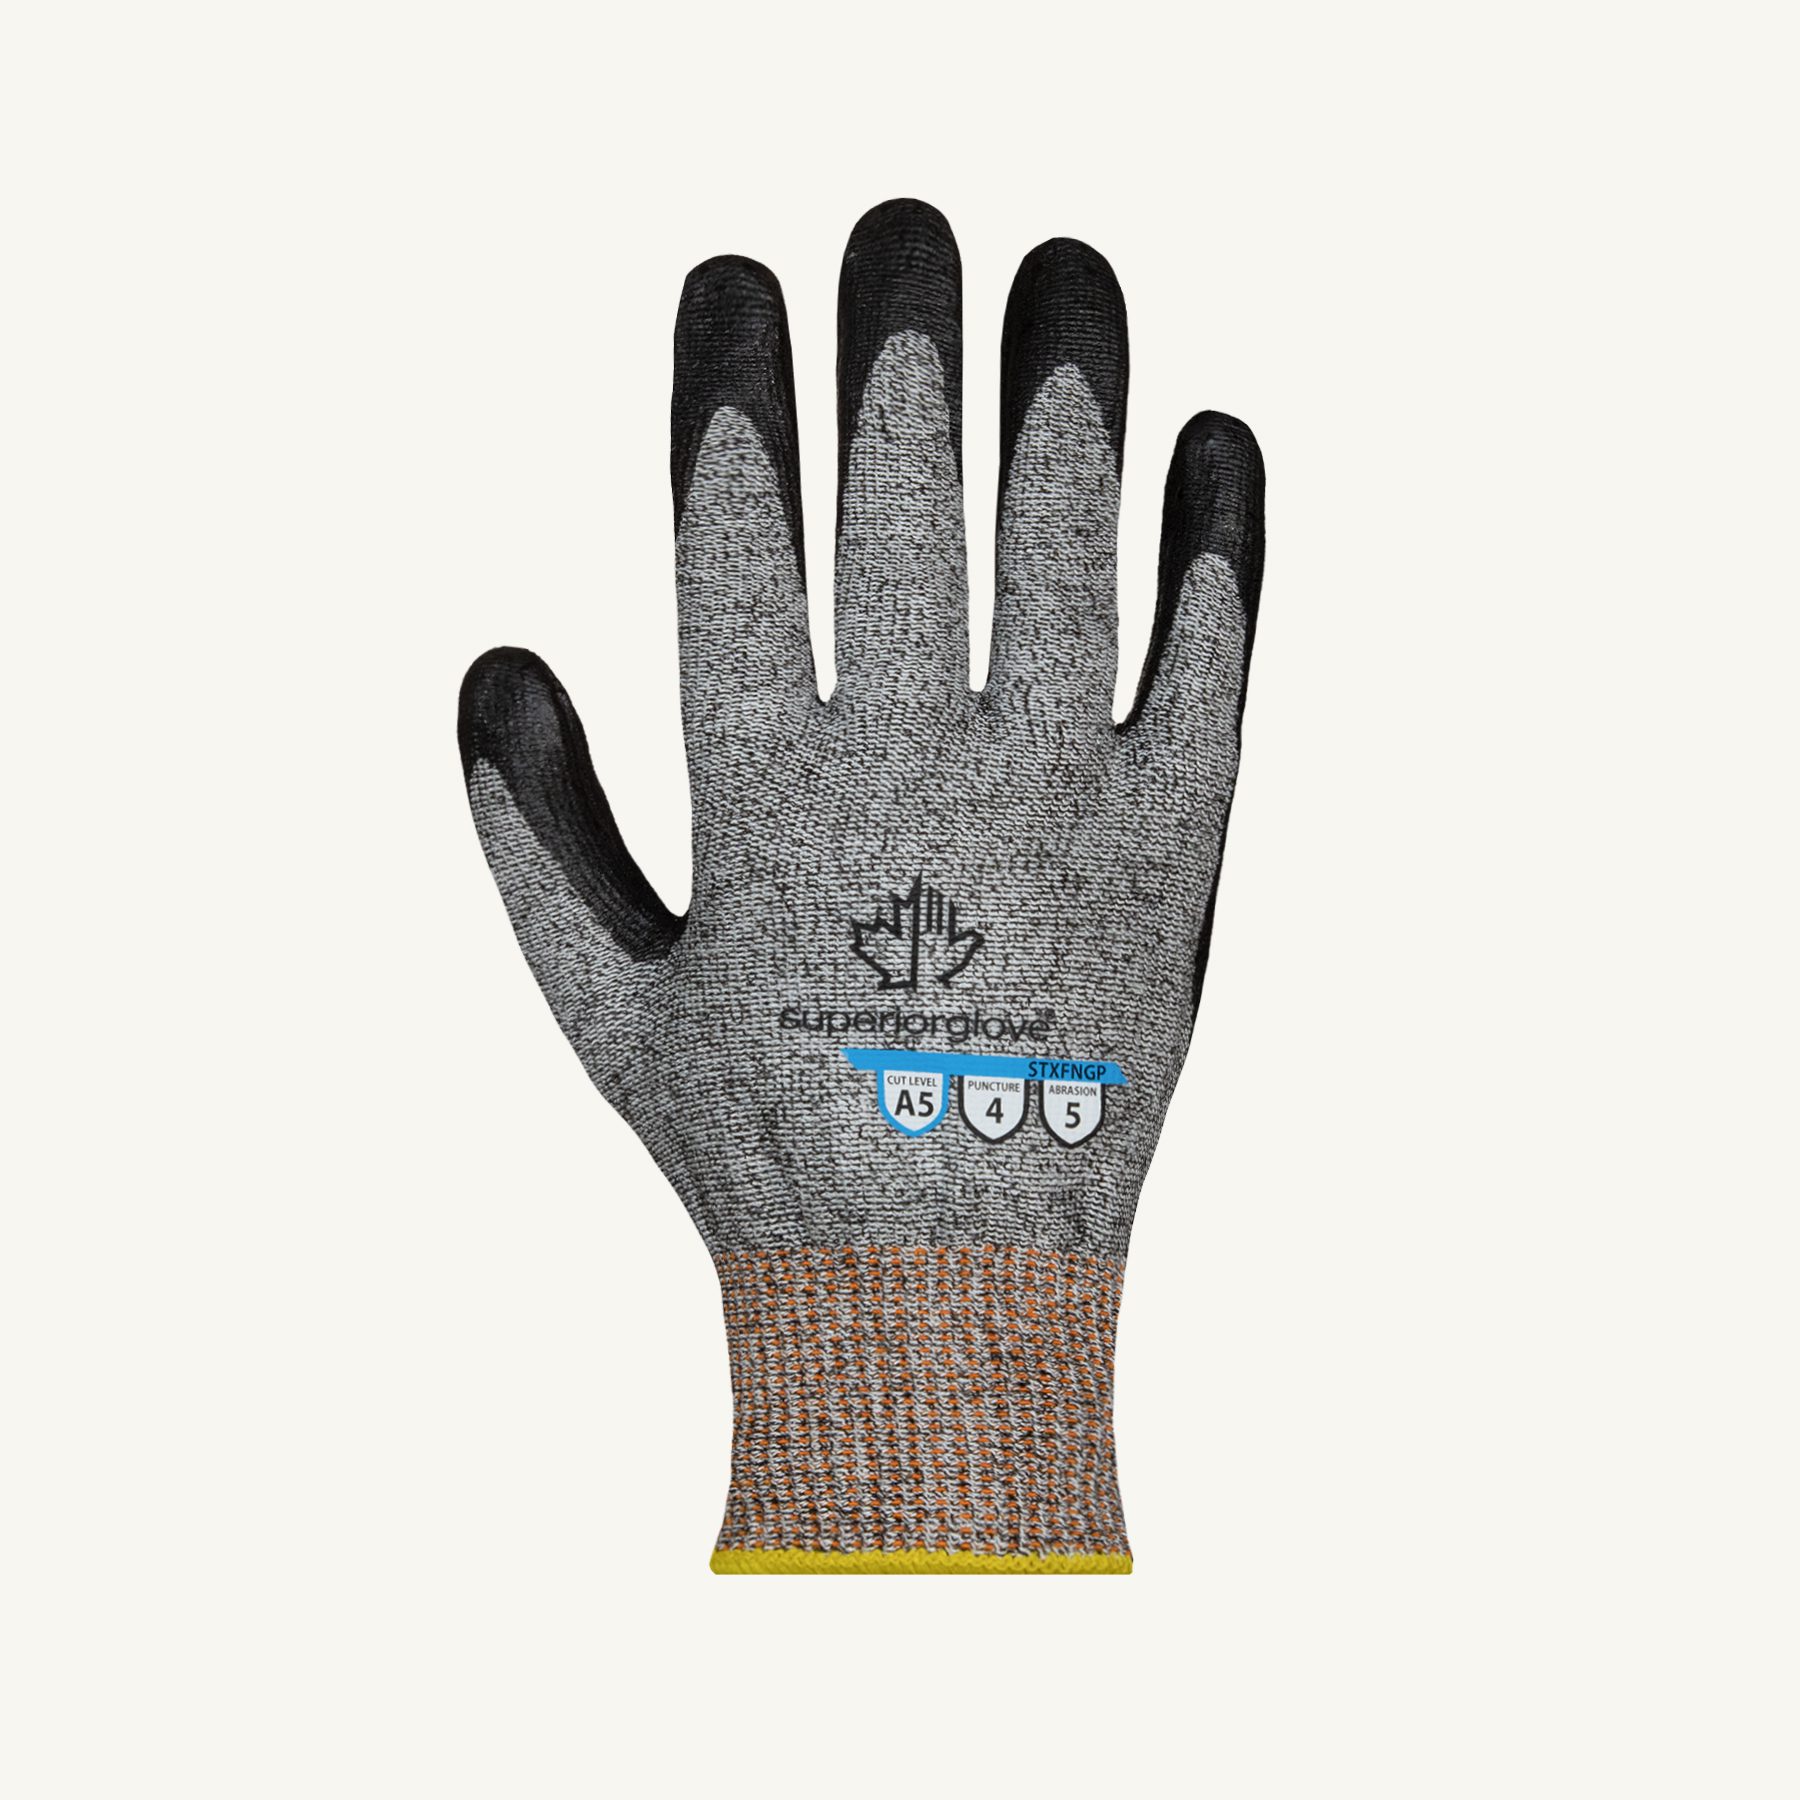 Sample Hand and Arm Protection for All Hazards